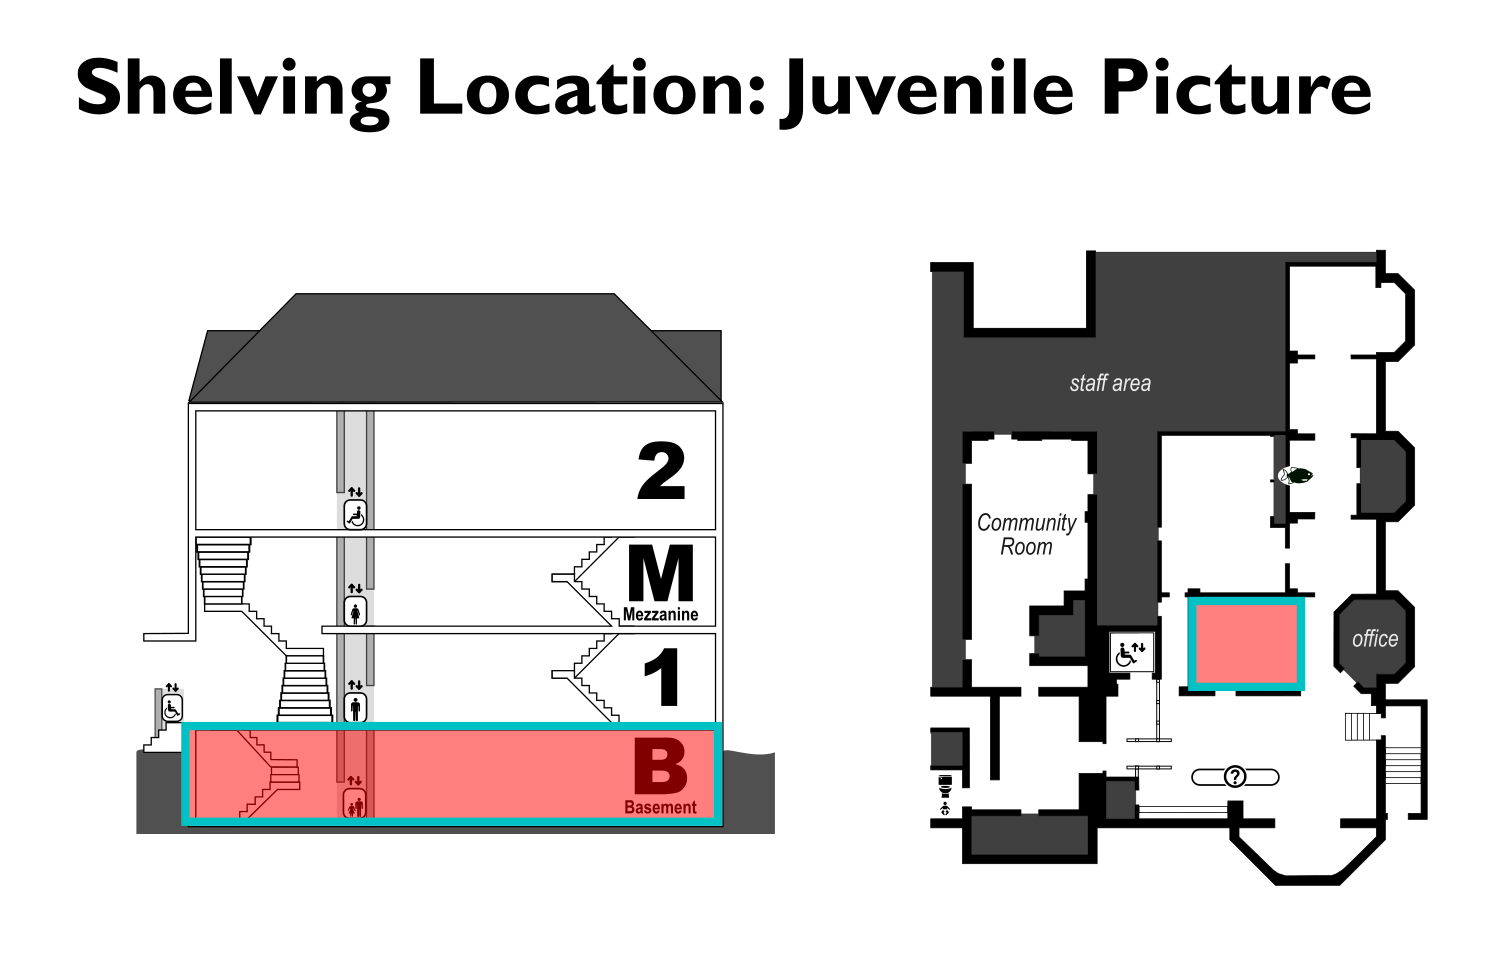 Map showing the location of the Juvenile Picture shelving location